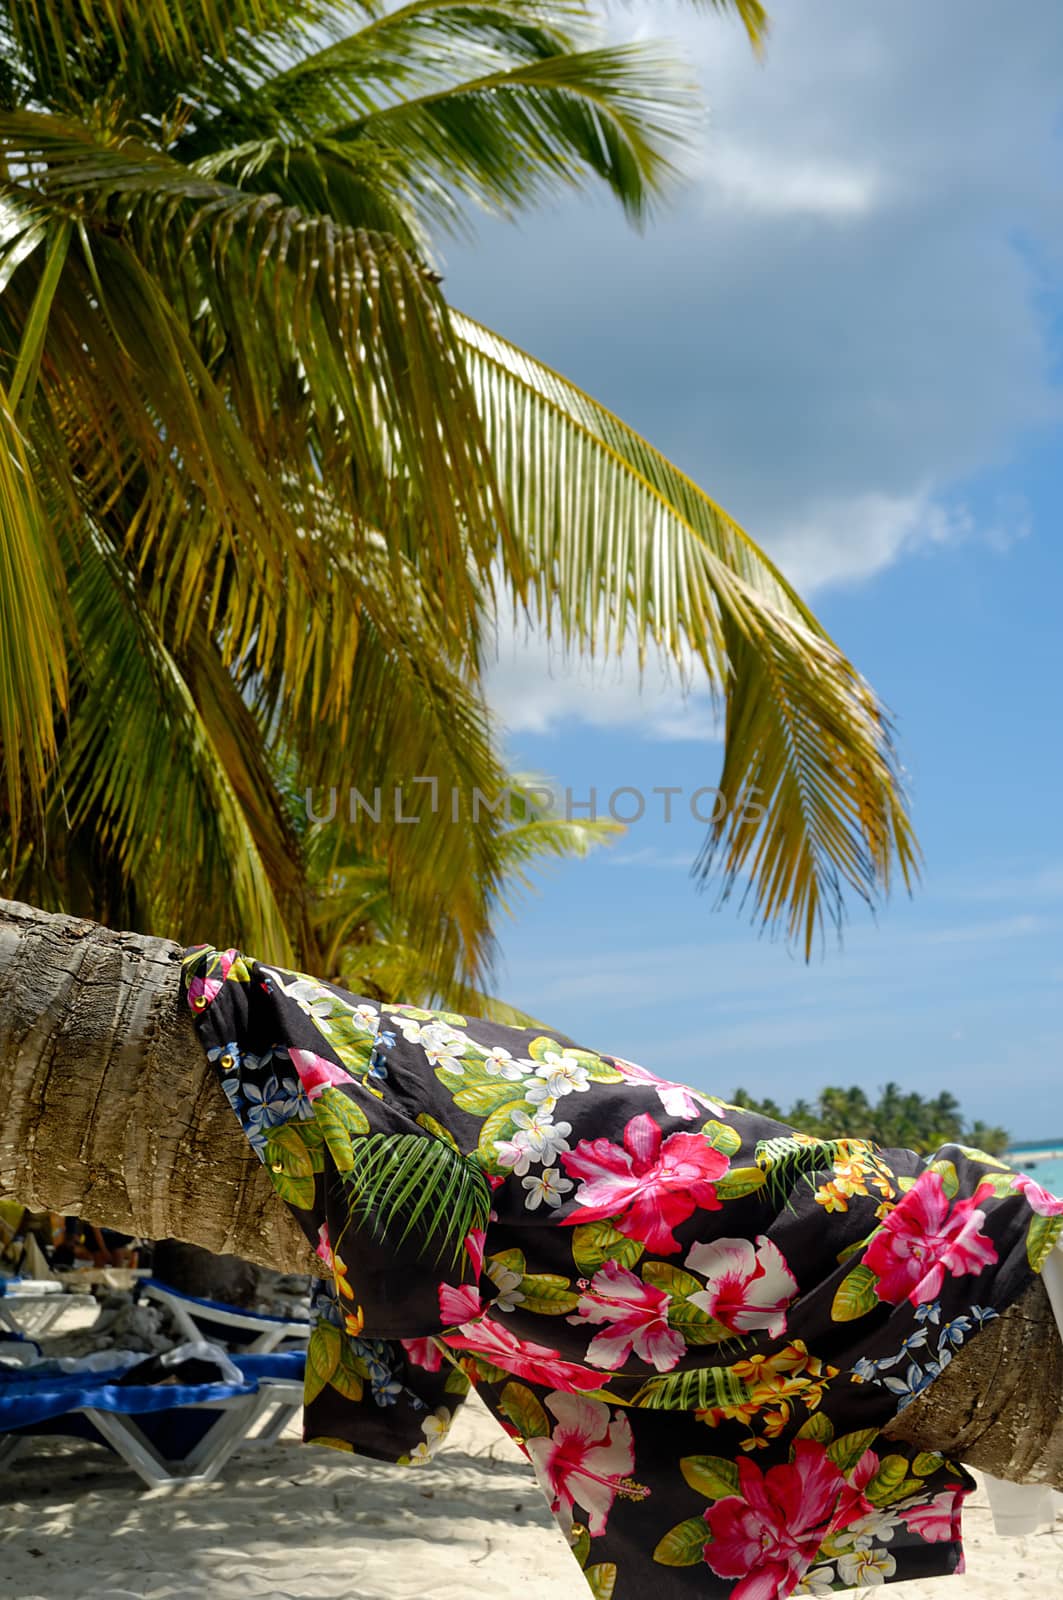 Clothing drying on palm at beach